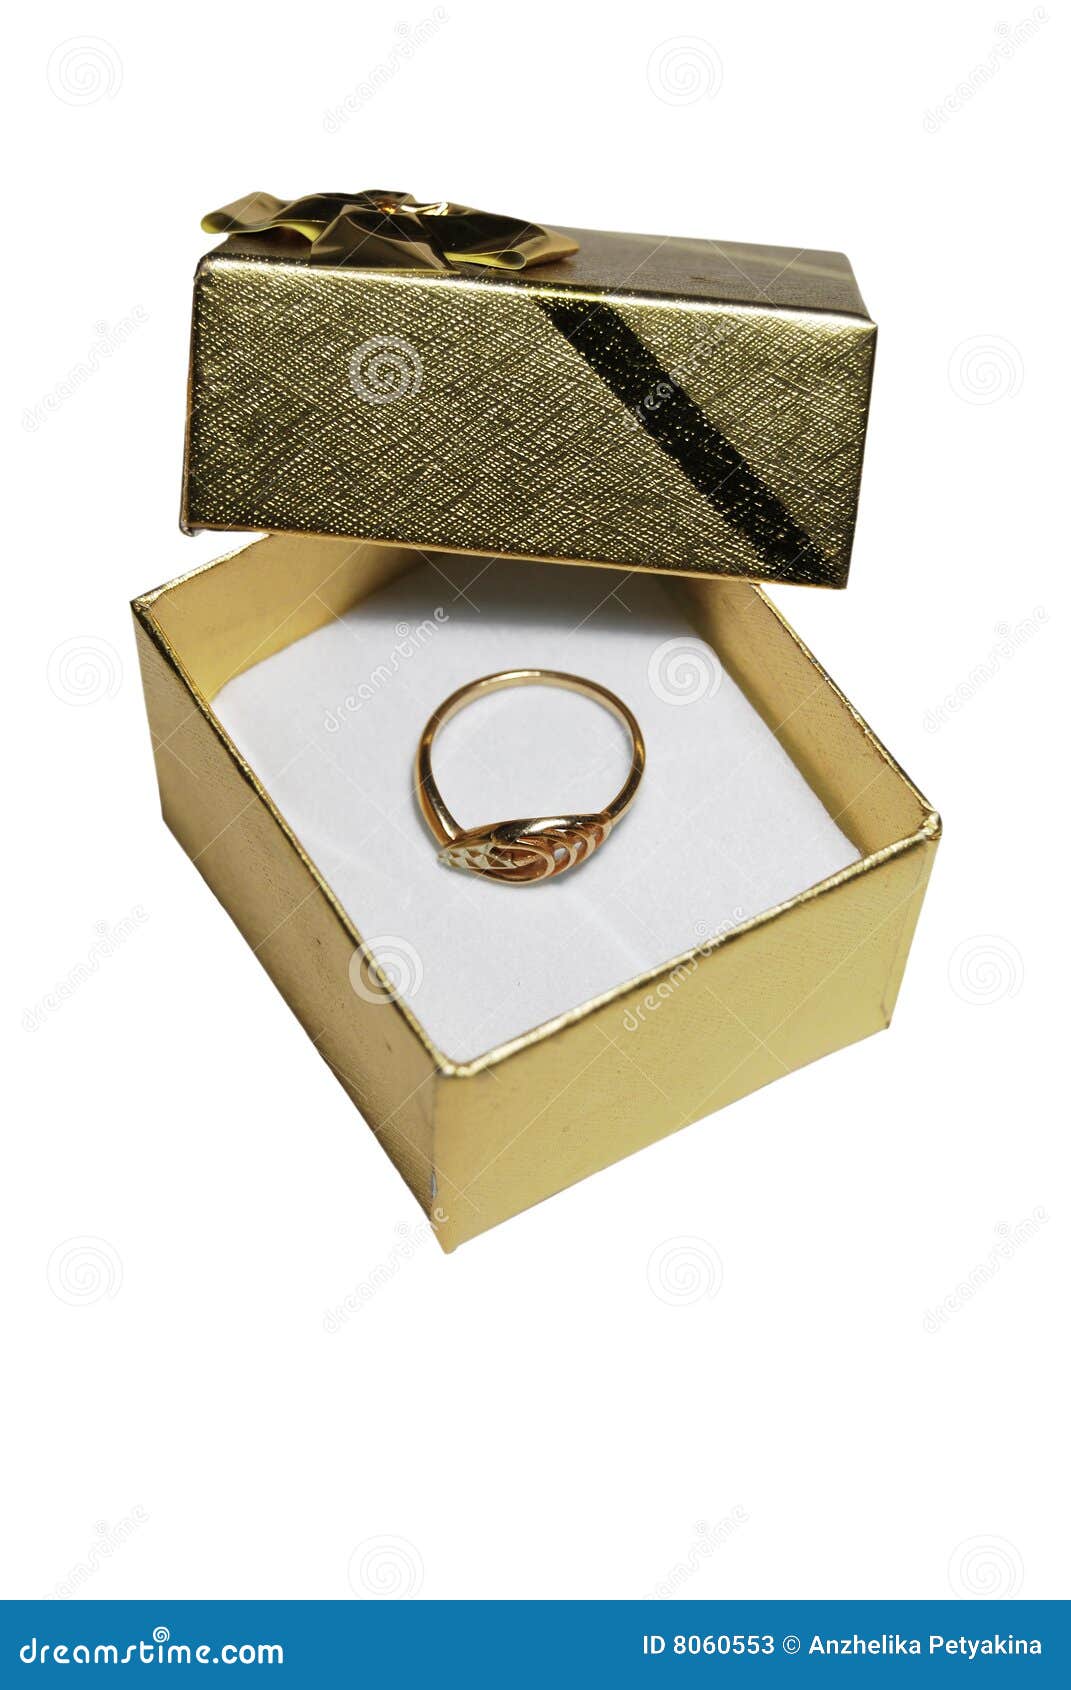 Buy quality Gold Gents Ring GJ-0002 in Ahmedabad